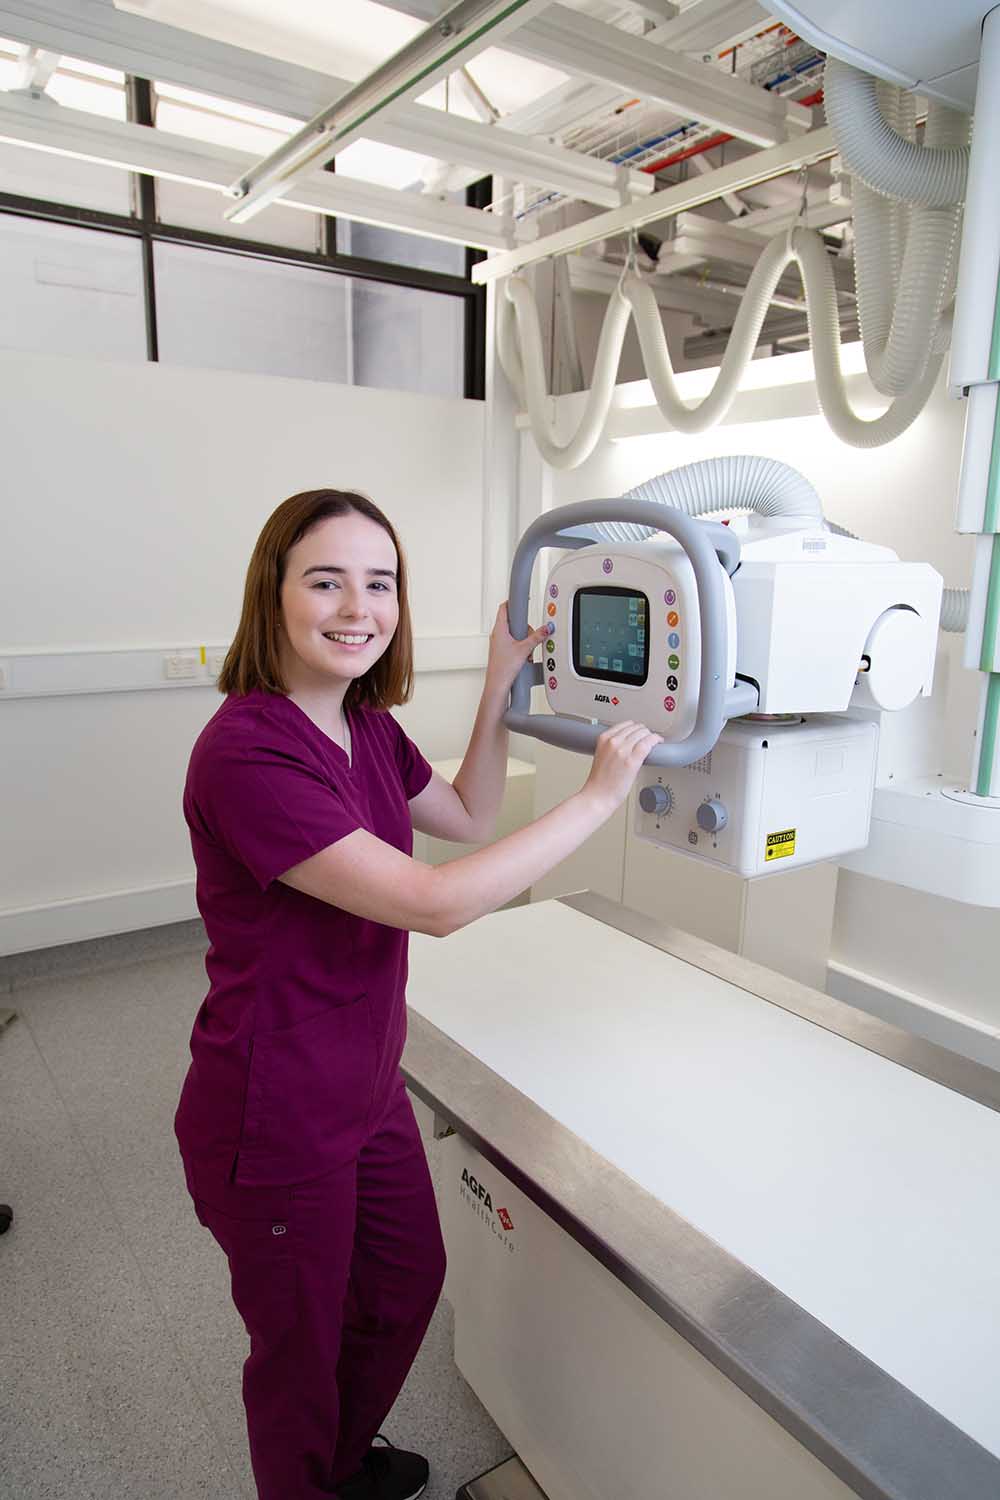 Zoe is wearing maroon scrubs and standing in front of an imaging machine, adjusting the settings for a treatment simulation.